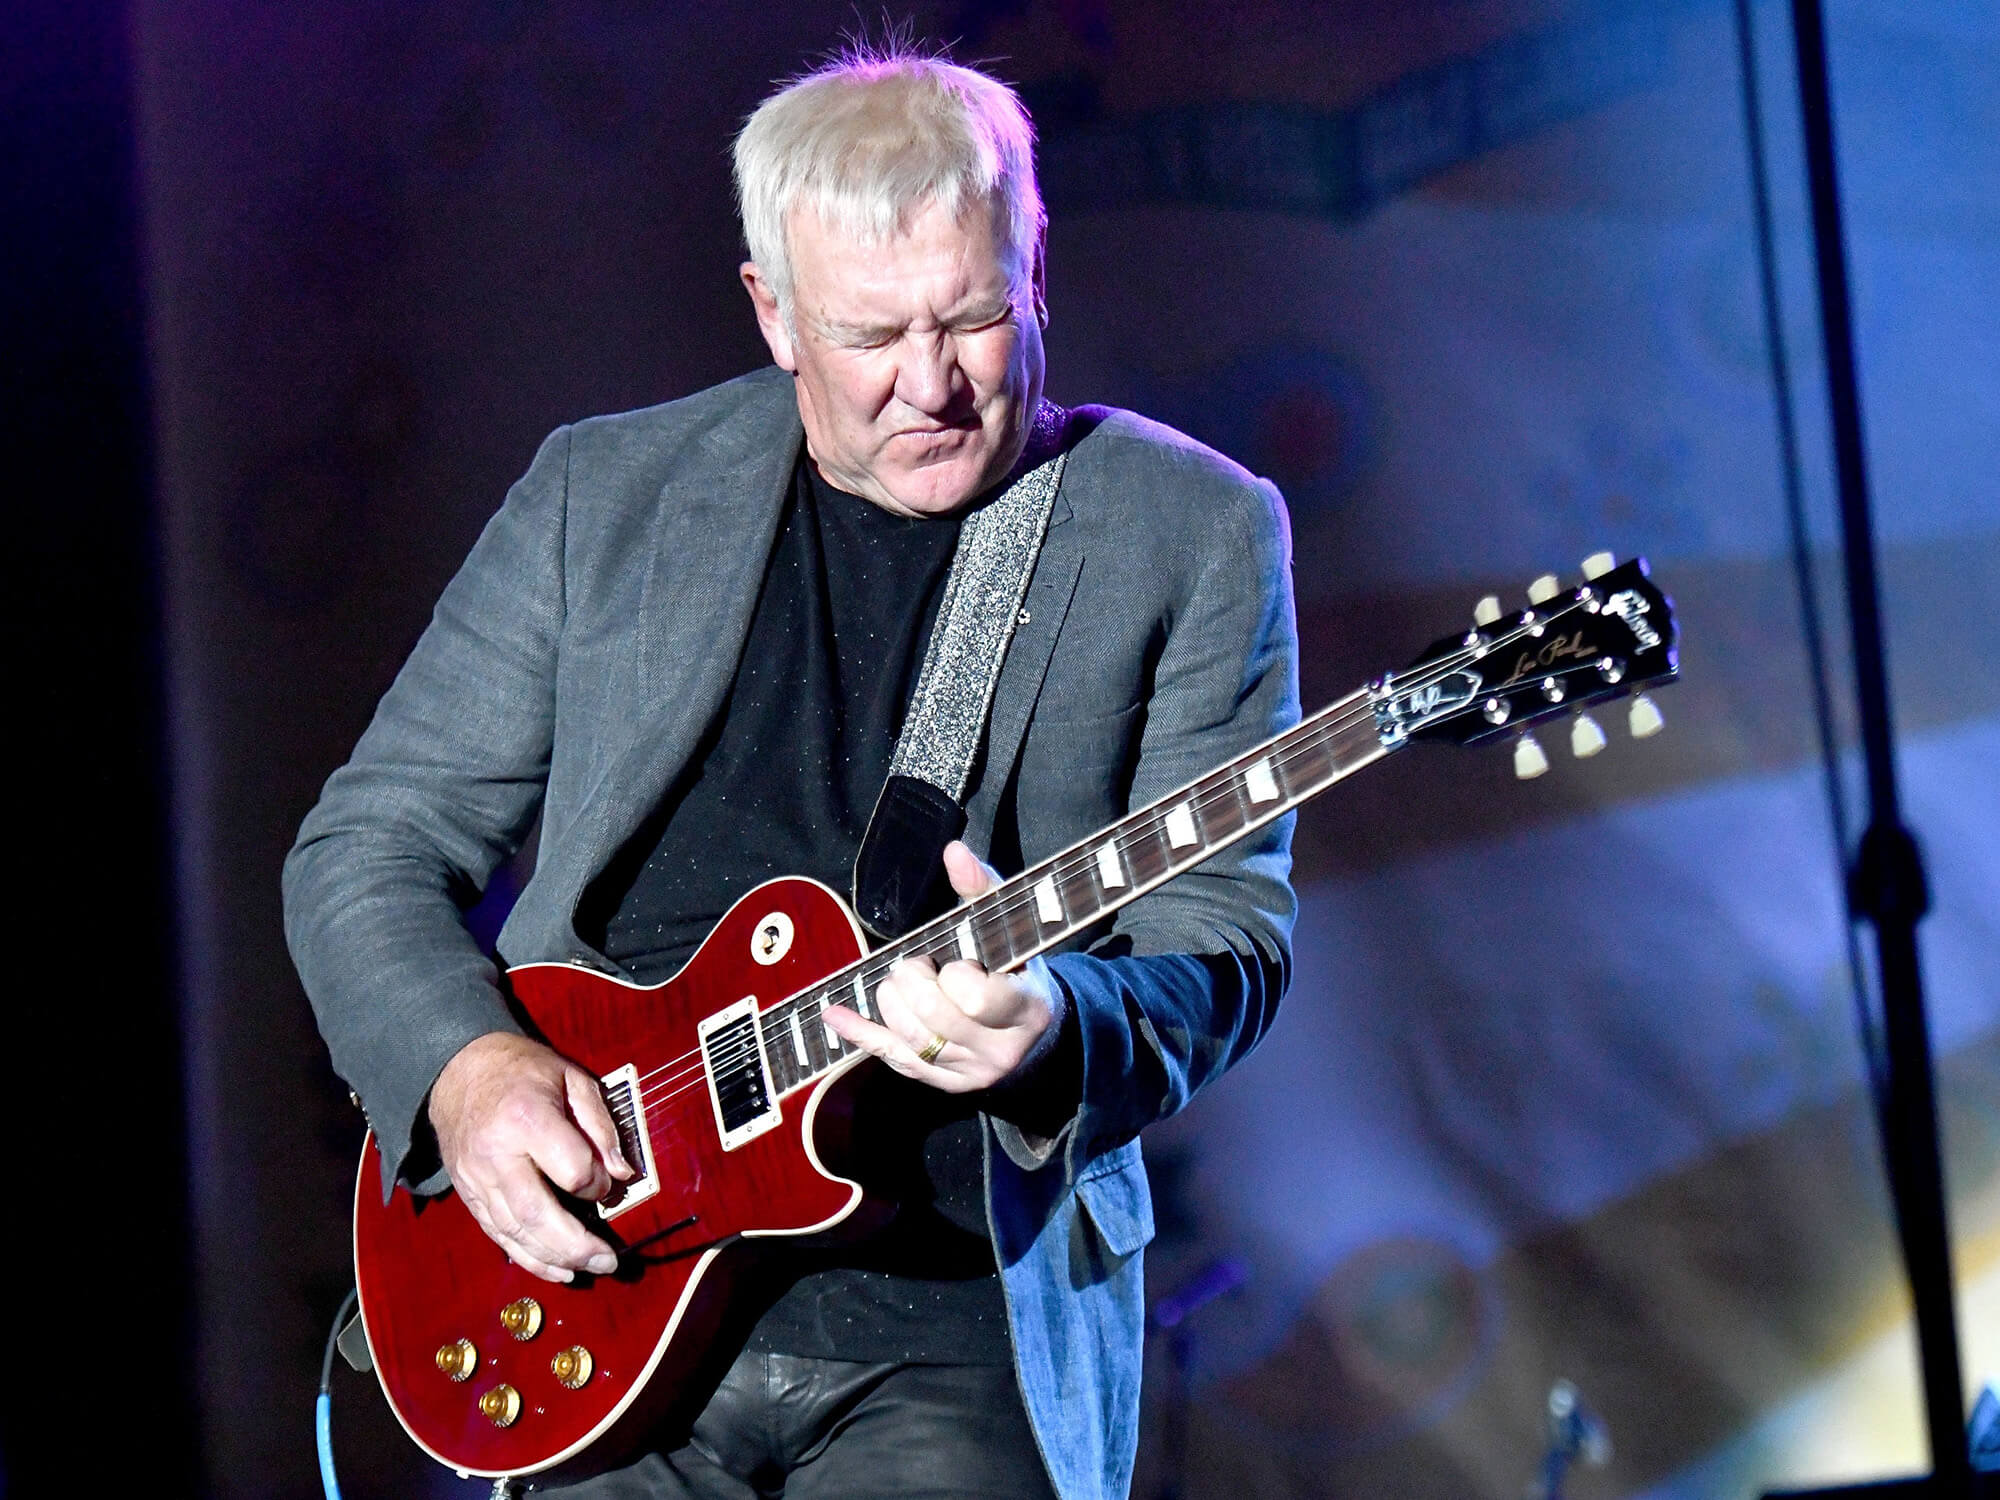 Alex Lifeson playing a red Les Paul. He has his eyes closed and is playing with a passionate expression on his face.